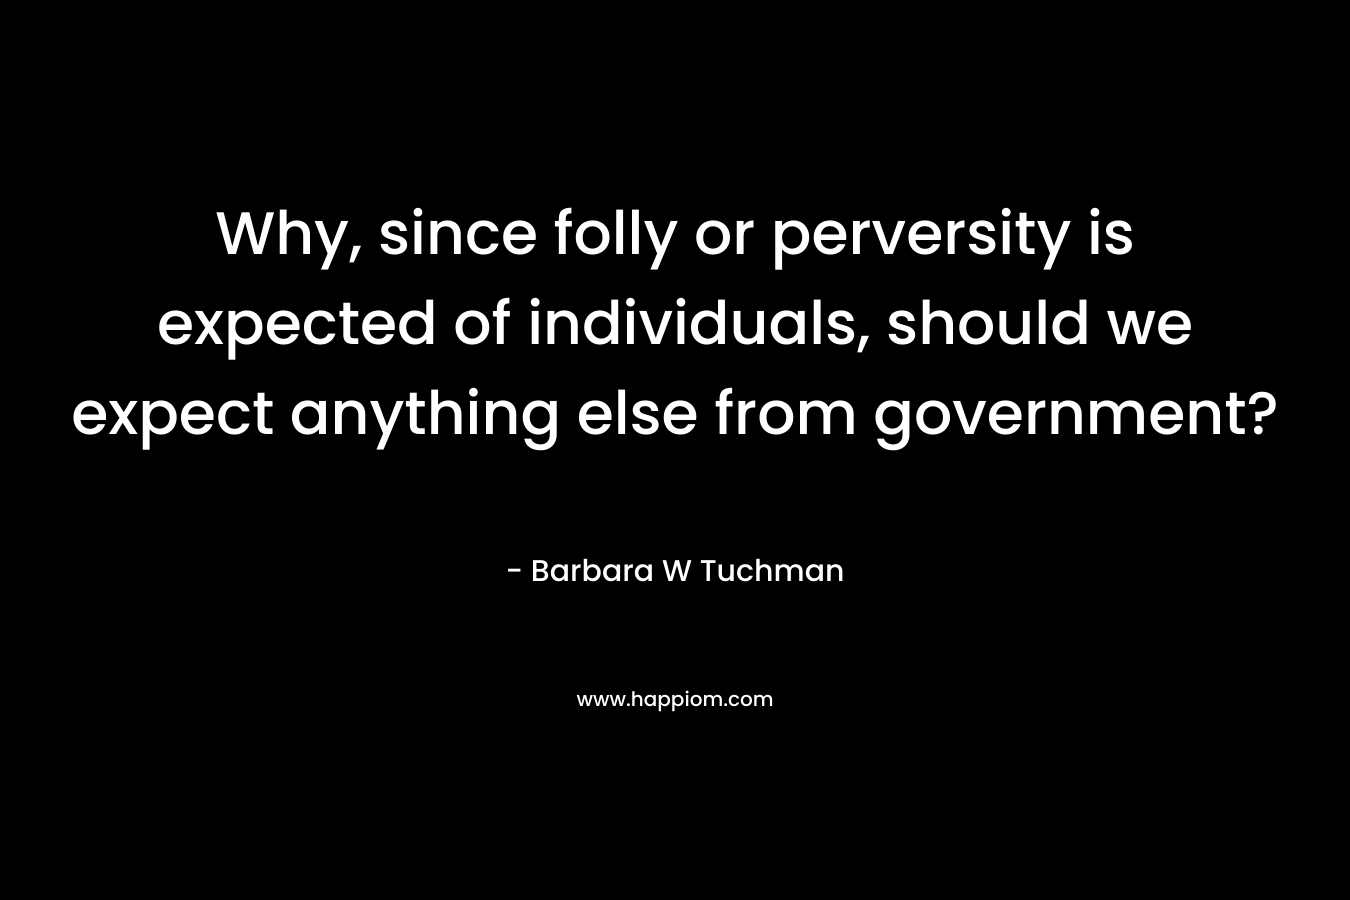 Why, since folly or perversity is expected of individuals, should we expect anything else from government?